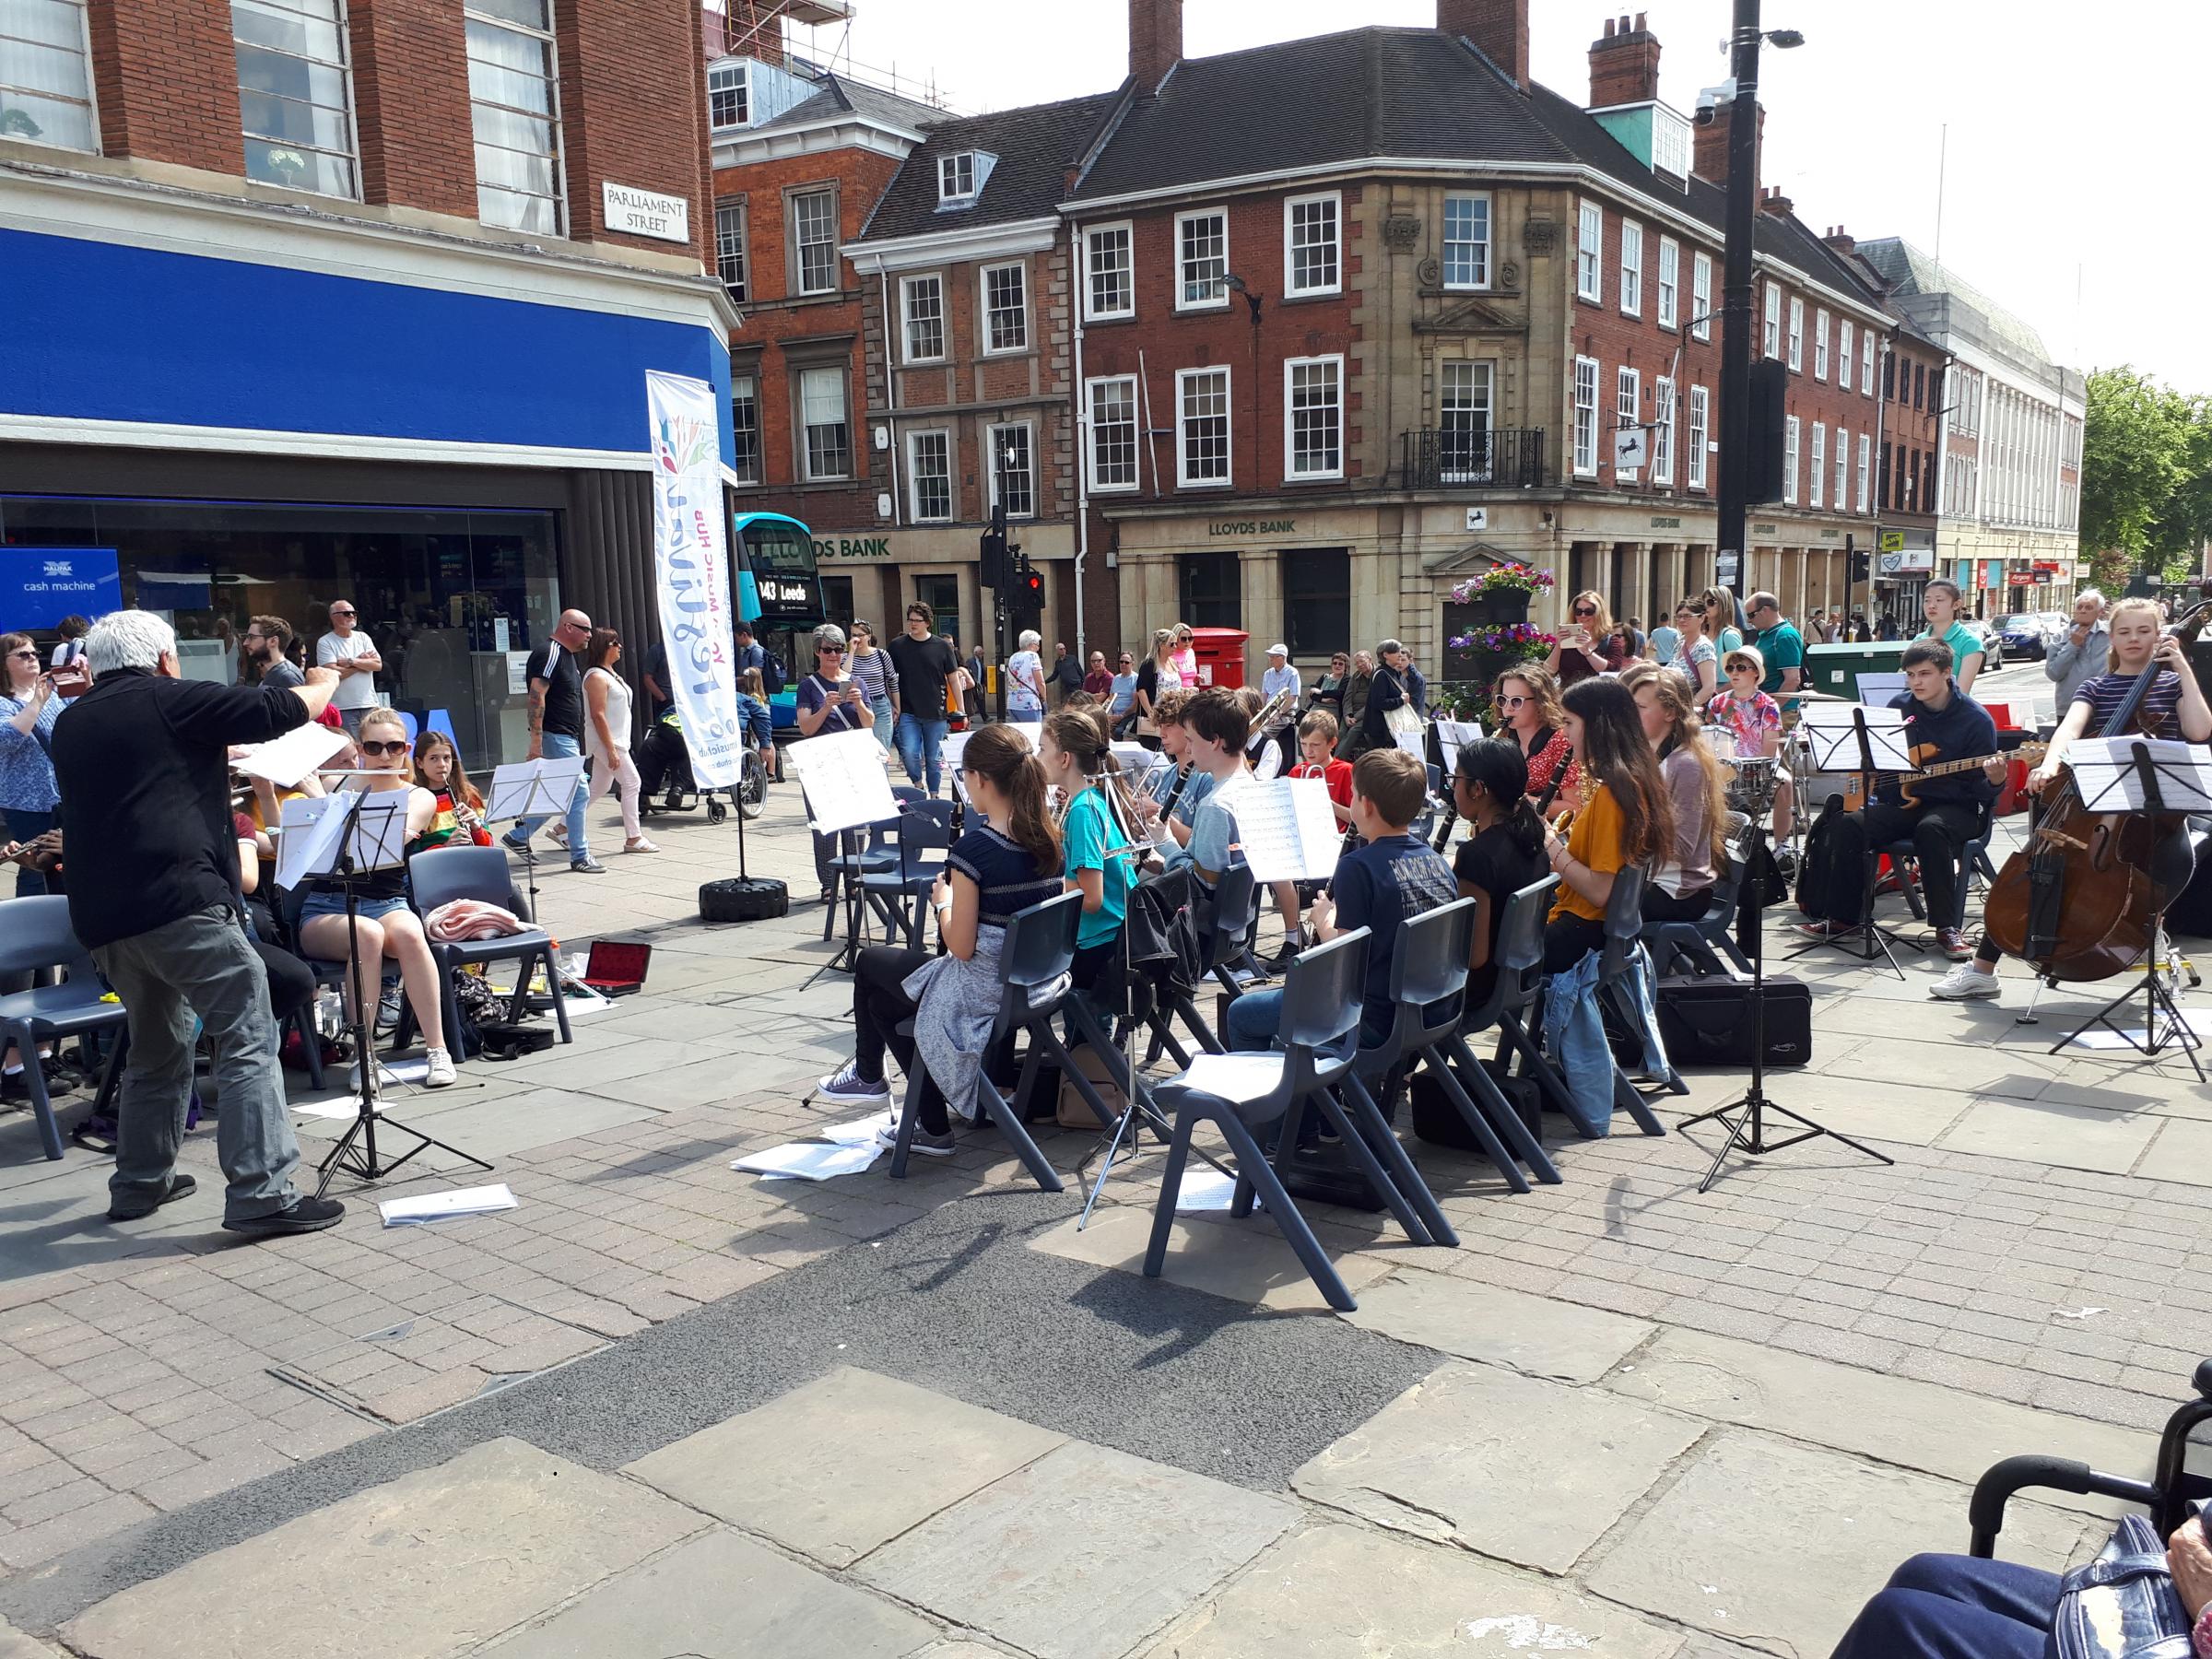 Young musicians wow crowds in York as part of music festival